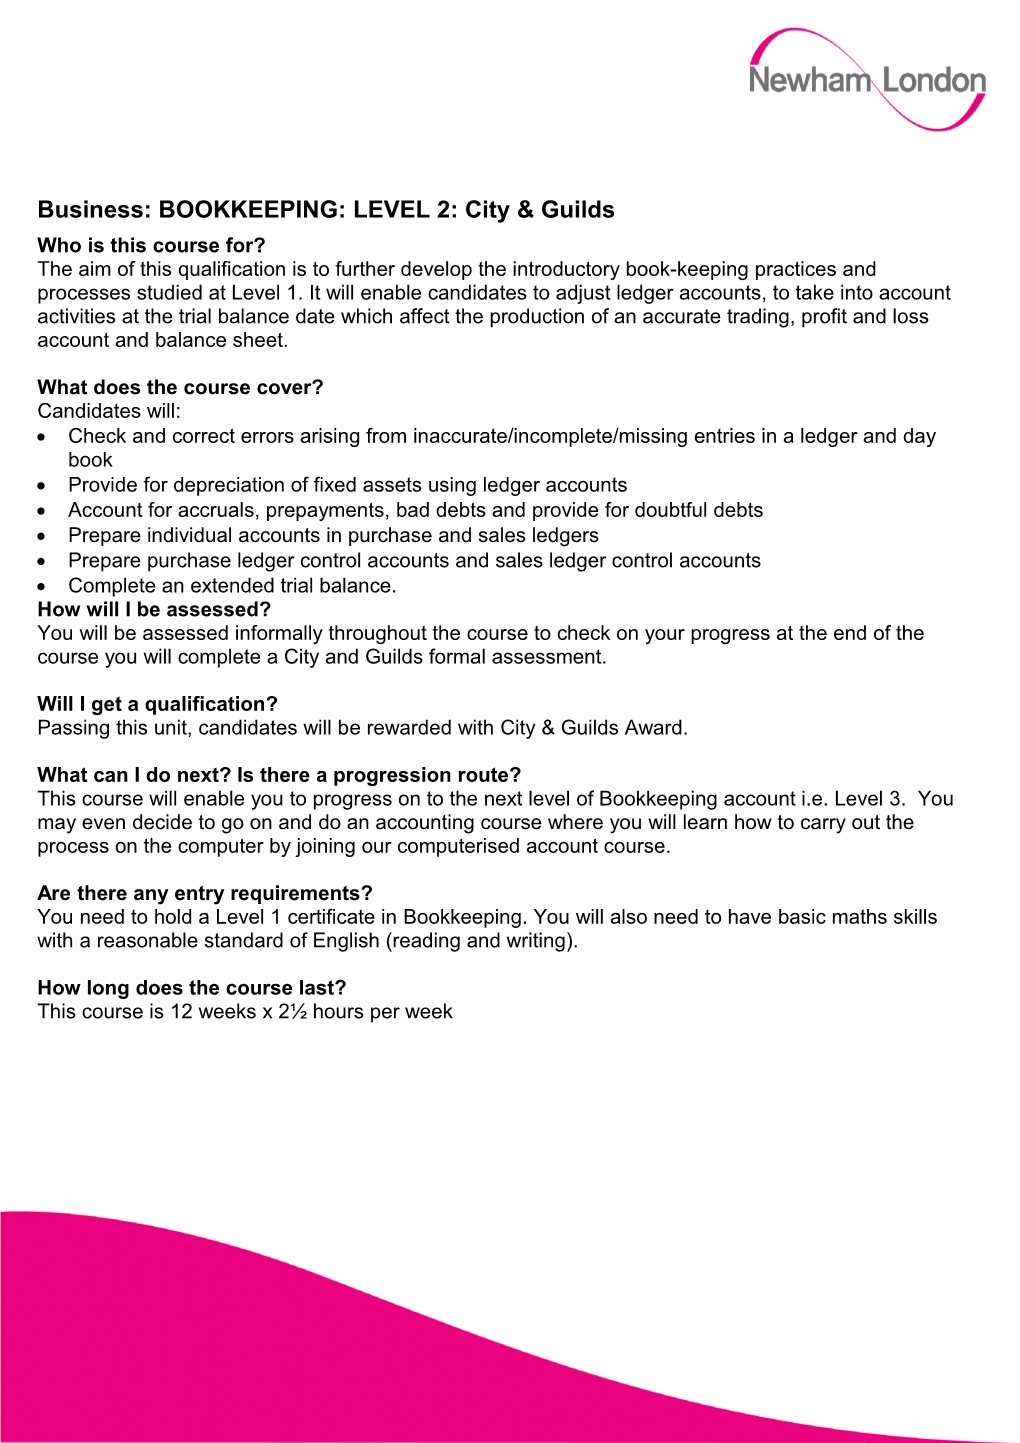 Newham Adult Learning Service - Course Information Sheet s1